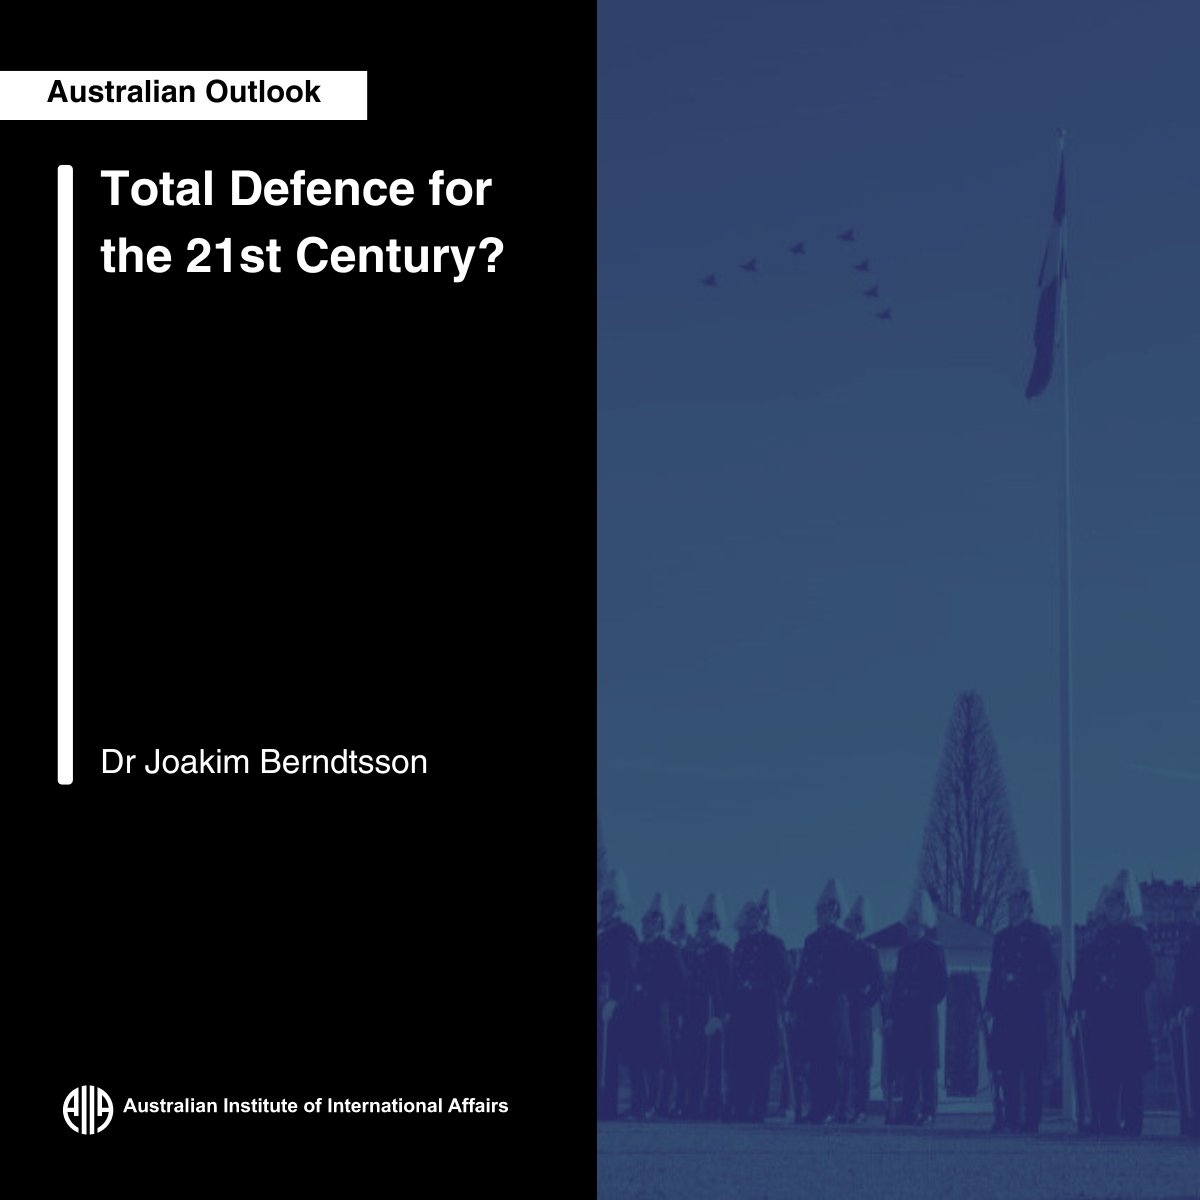 “Nordic countries turn once again to total or defence models. Yet rebuilding these whole-of-society structures comes with structural as well as political and social challenges,” discussed by Dr Joakim Berndtsson Read more at Australian Outlook👇 ow.ly/3J4n50R8TvG